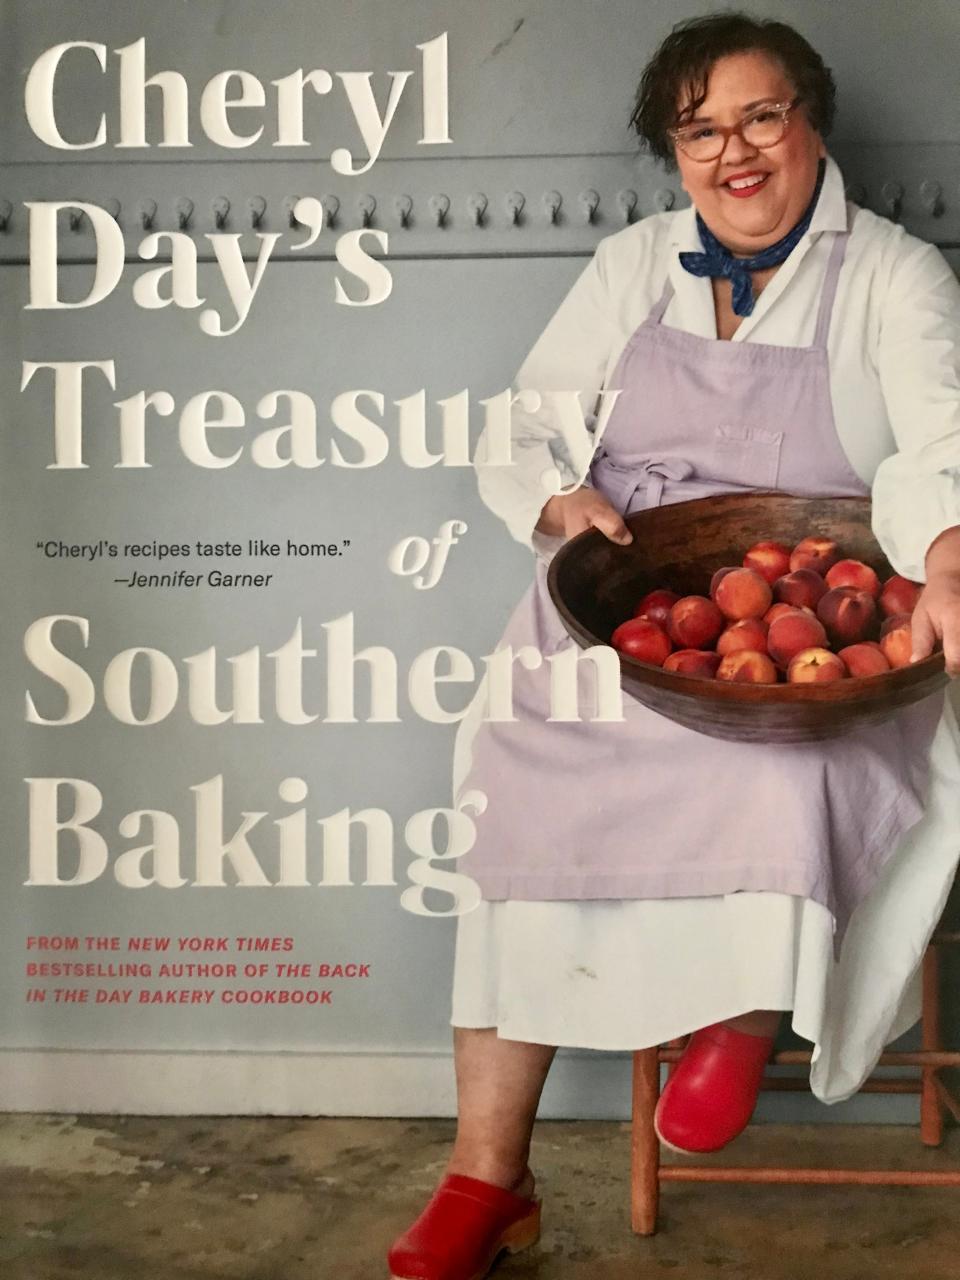 "Cheryl Day's Treasury of Southern Baking" presents more than 200 recipes, both historical and updated.